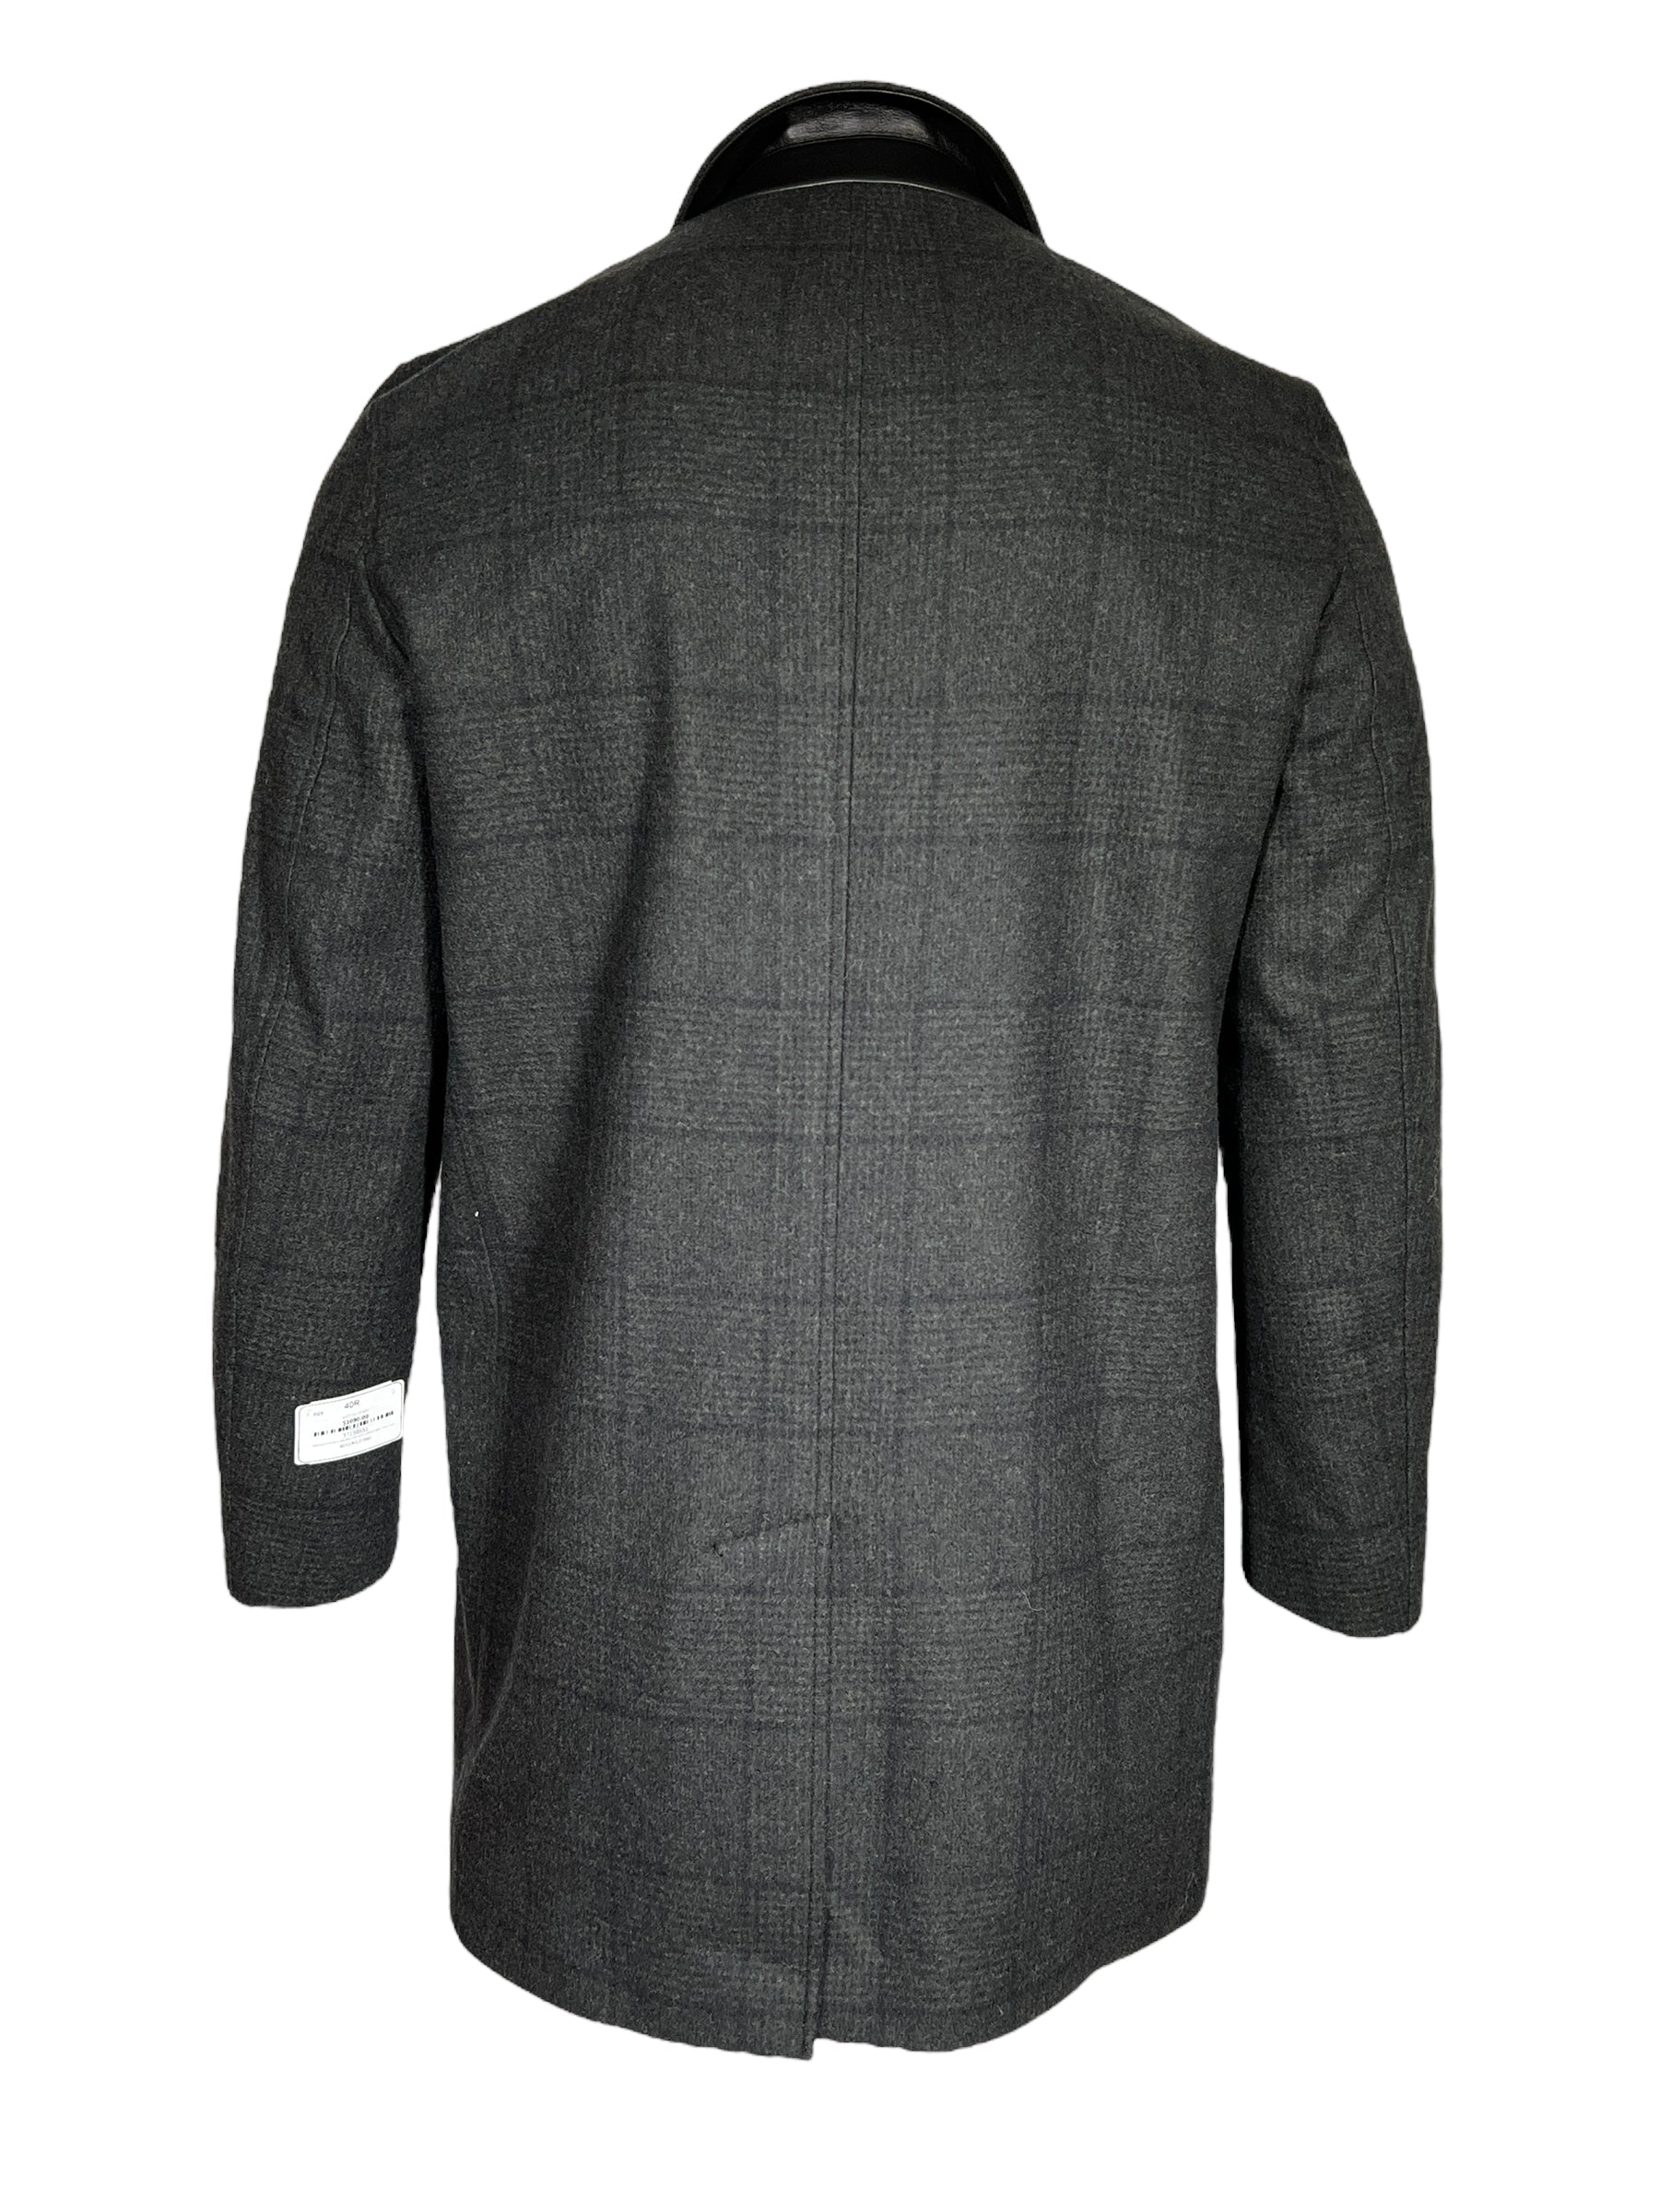 OARS & OLD IVY WOOL WALKING COAT WITH LEATHER TRIM - OLIVE PLAID